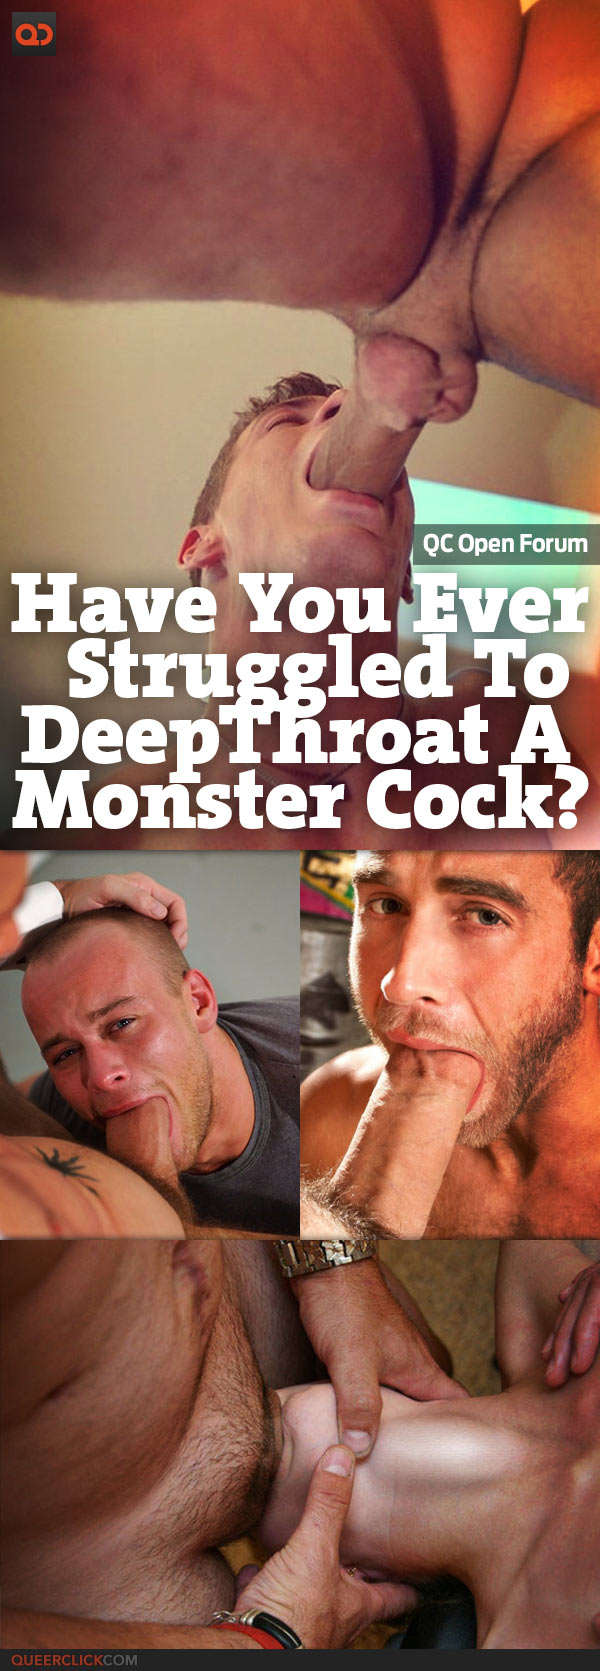 QC Open Forum: Have You Ever Struggled To Deepthroat A Monster Cock? -  QueerClick